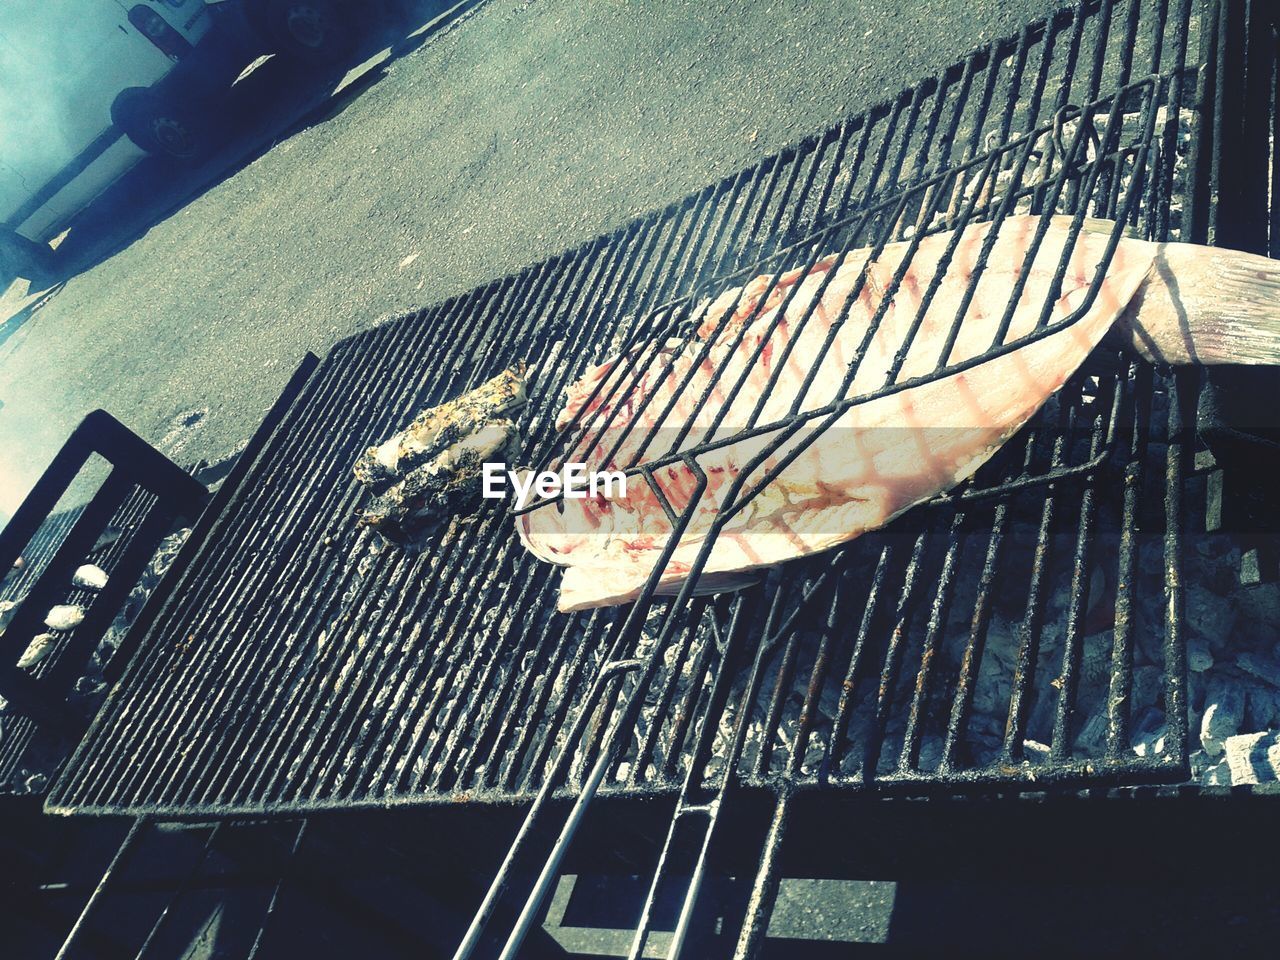 barbecue grill, barbecue, food and drink, high angle view, fish, grilled, day, preparation, outdoors, food, seafood, no people, metal grate, healthy eating, close-up, water, freshness